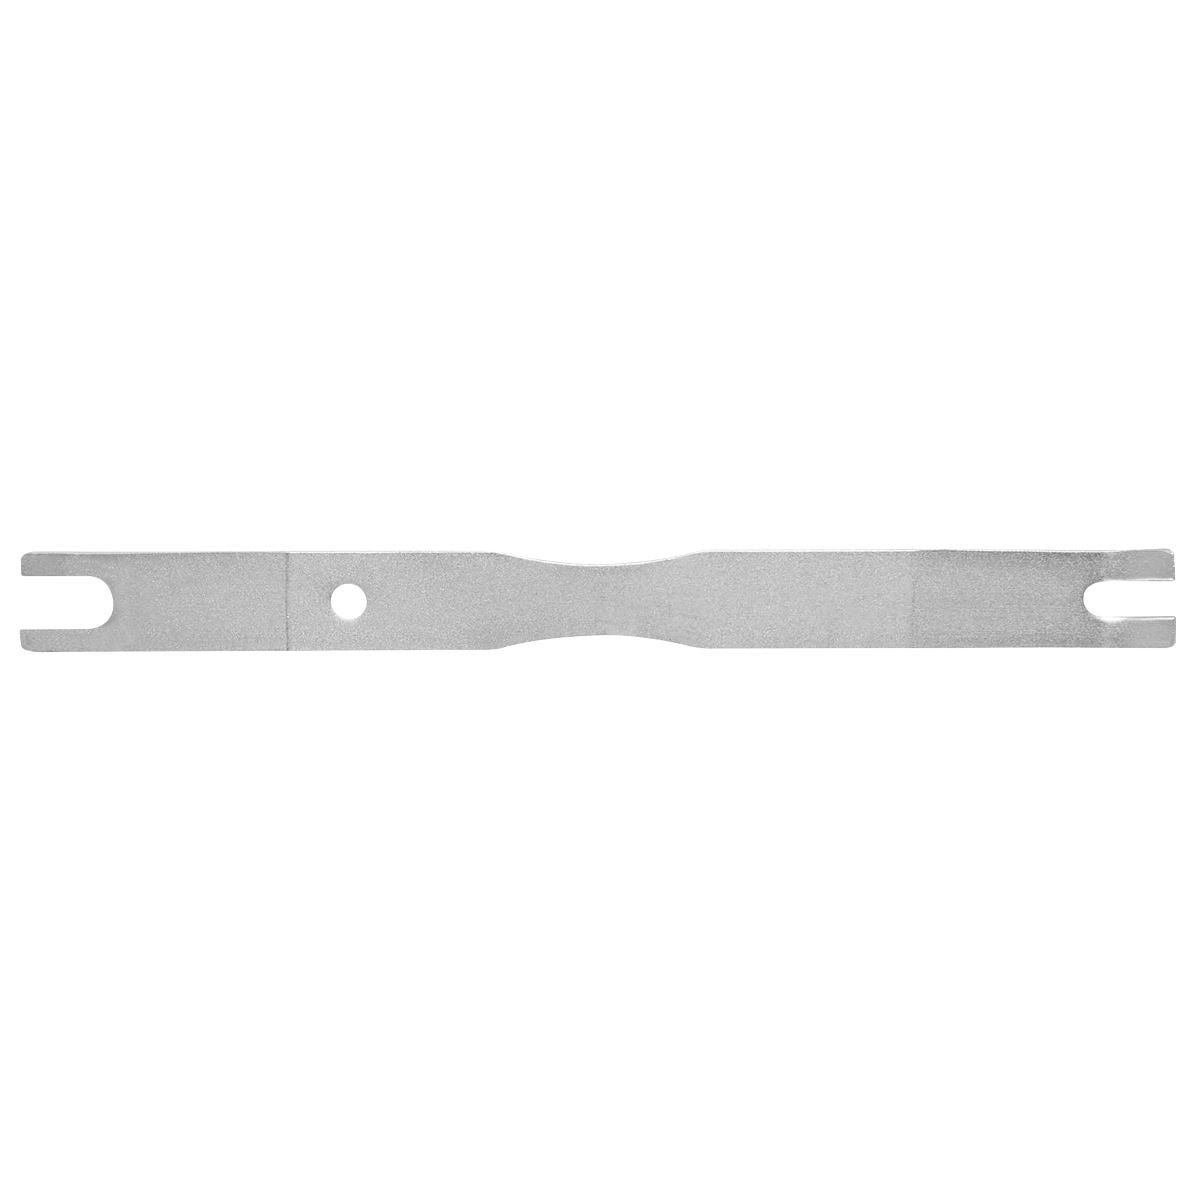 Sealey Premier Small/Large Trim Clip Tool Carbon Steel